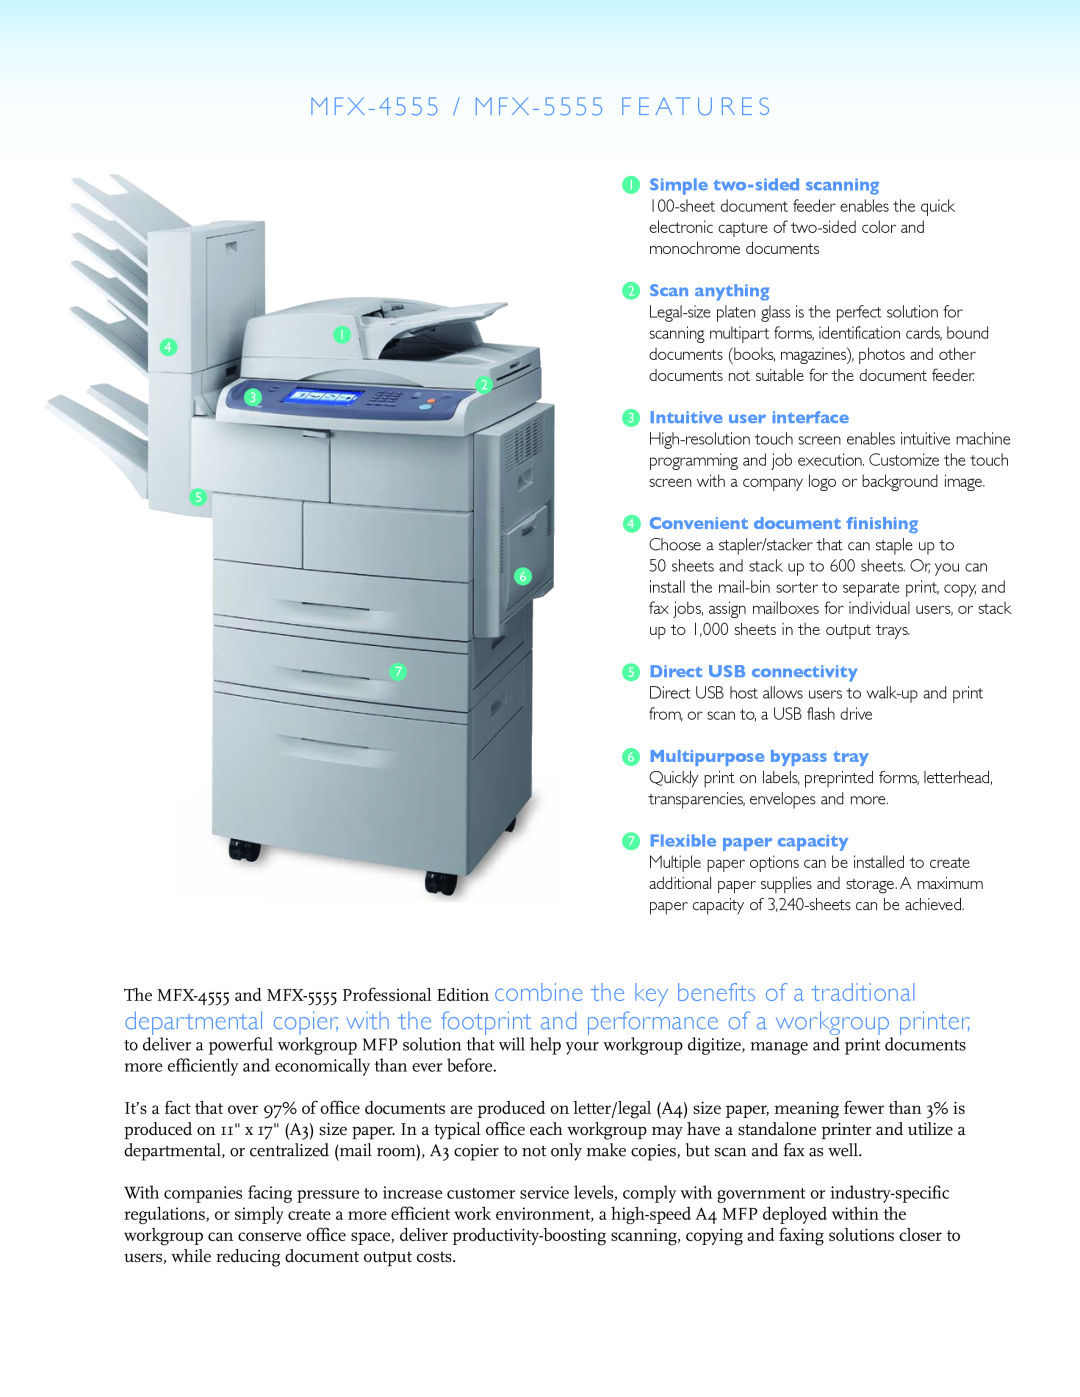 Muratec MFX-5555 MFX - 4555 / MFX - 5555 F E AT U R E S, Simple two-sided scanning, monochrome documents, Scan anything 